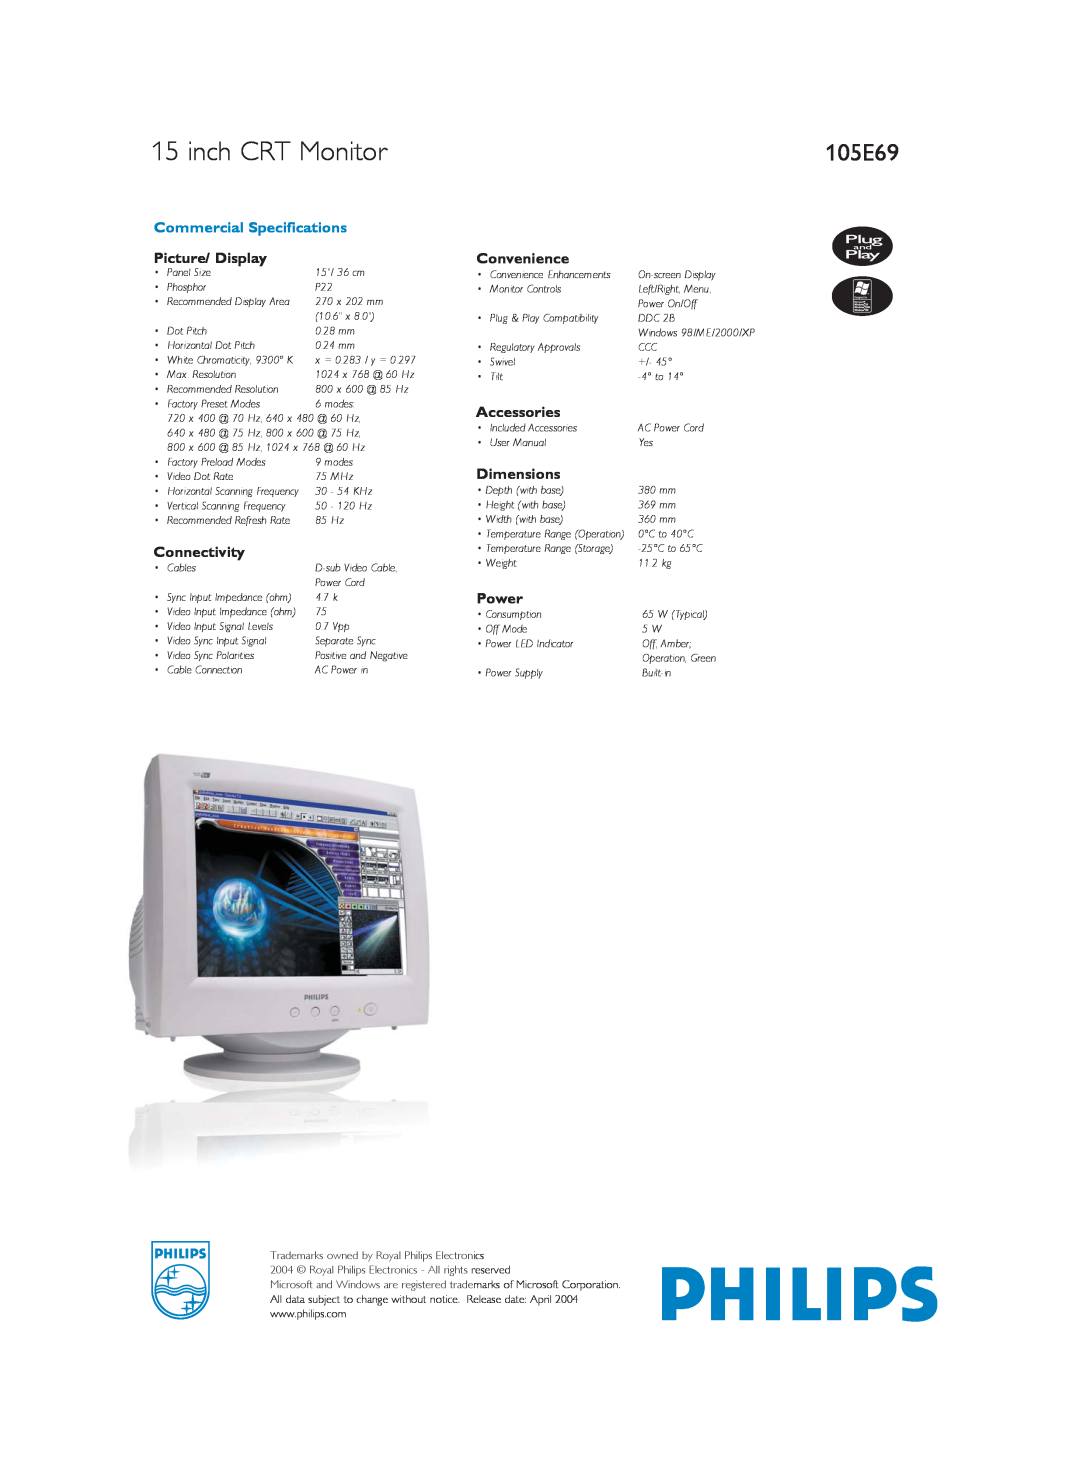 Philips 105E69 dimensions inch CRT Monitor, Commercial Specifications, Picture/ Display, Convenience, Accessories, Power 